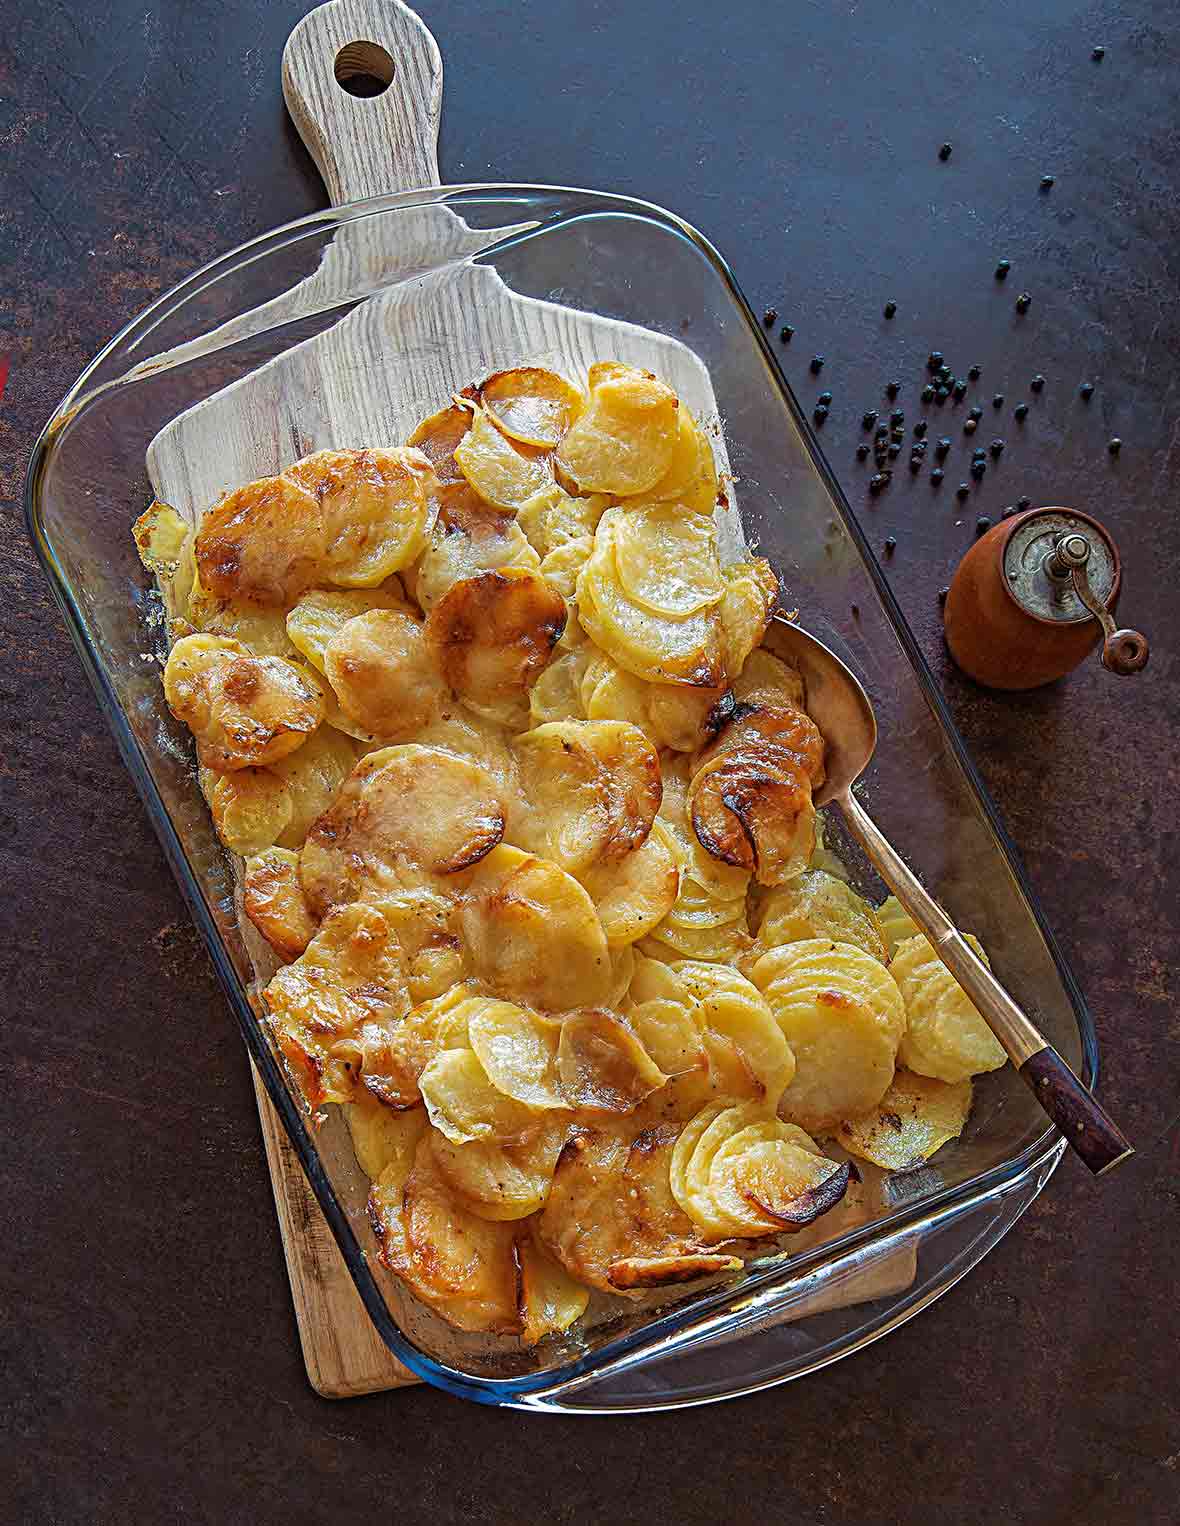 A glass casserole dish filled with golden brown easy scalloped potatoes